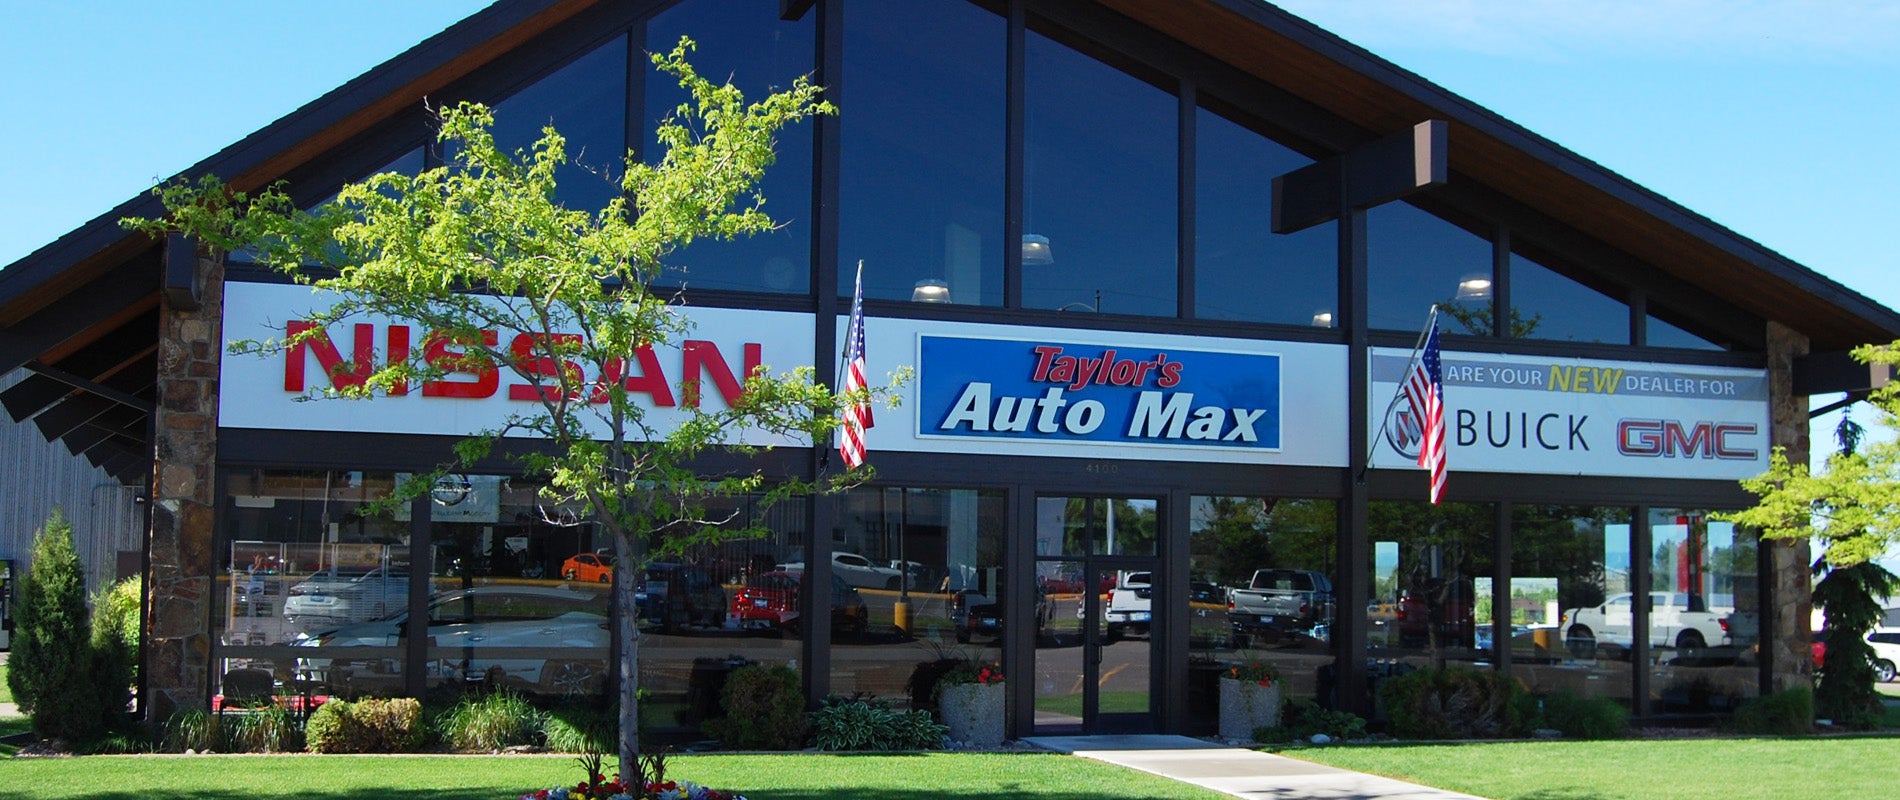 Taylor’s Auto Max Nissan GMC Buick of Great Falls storefront